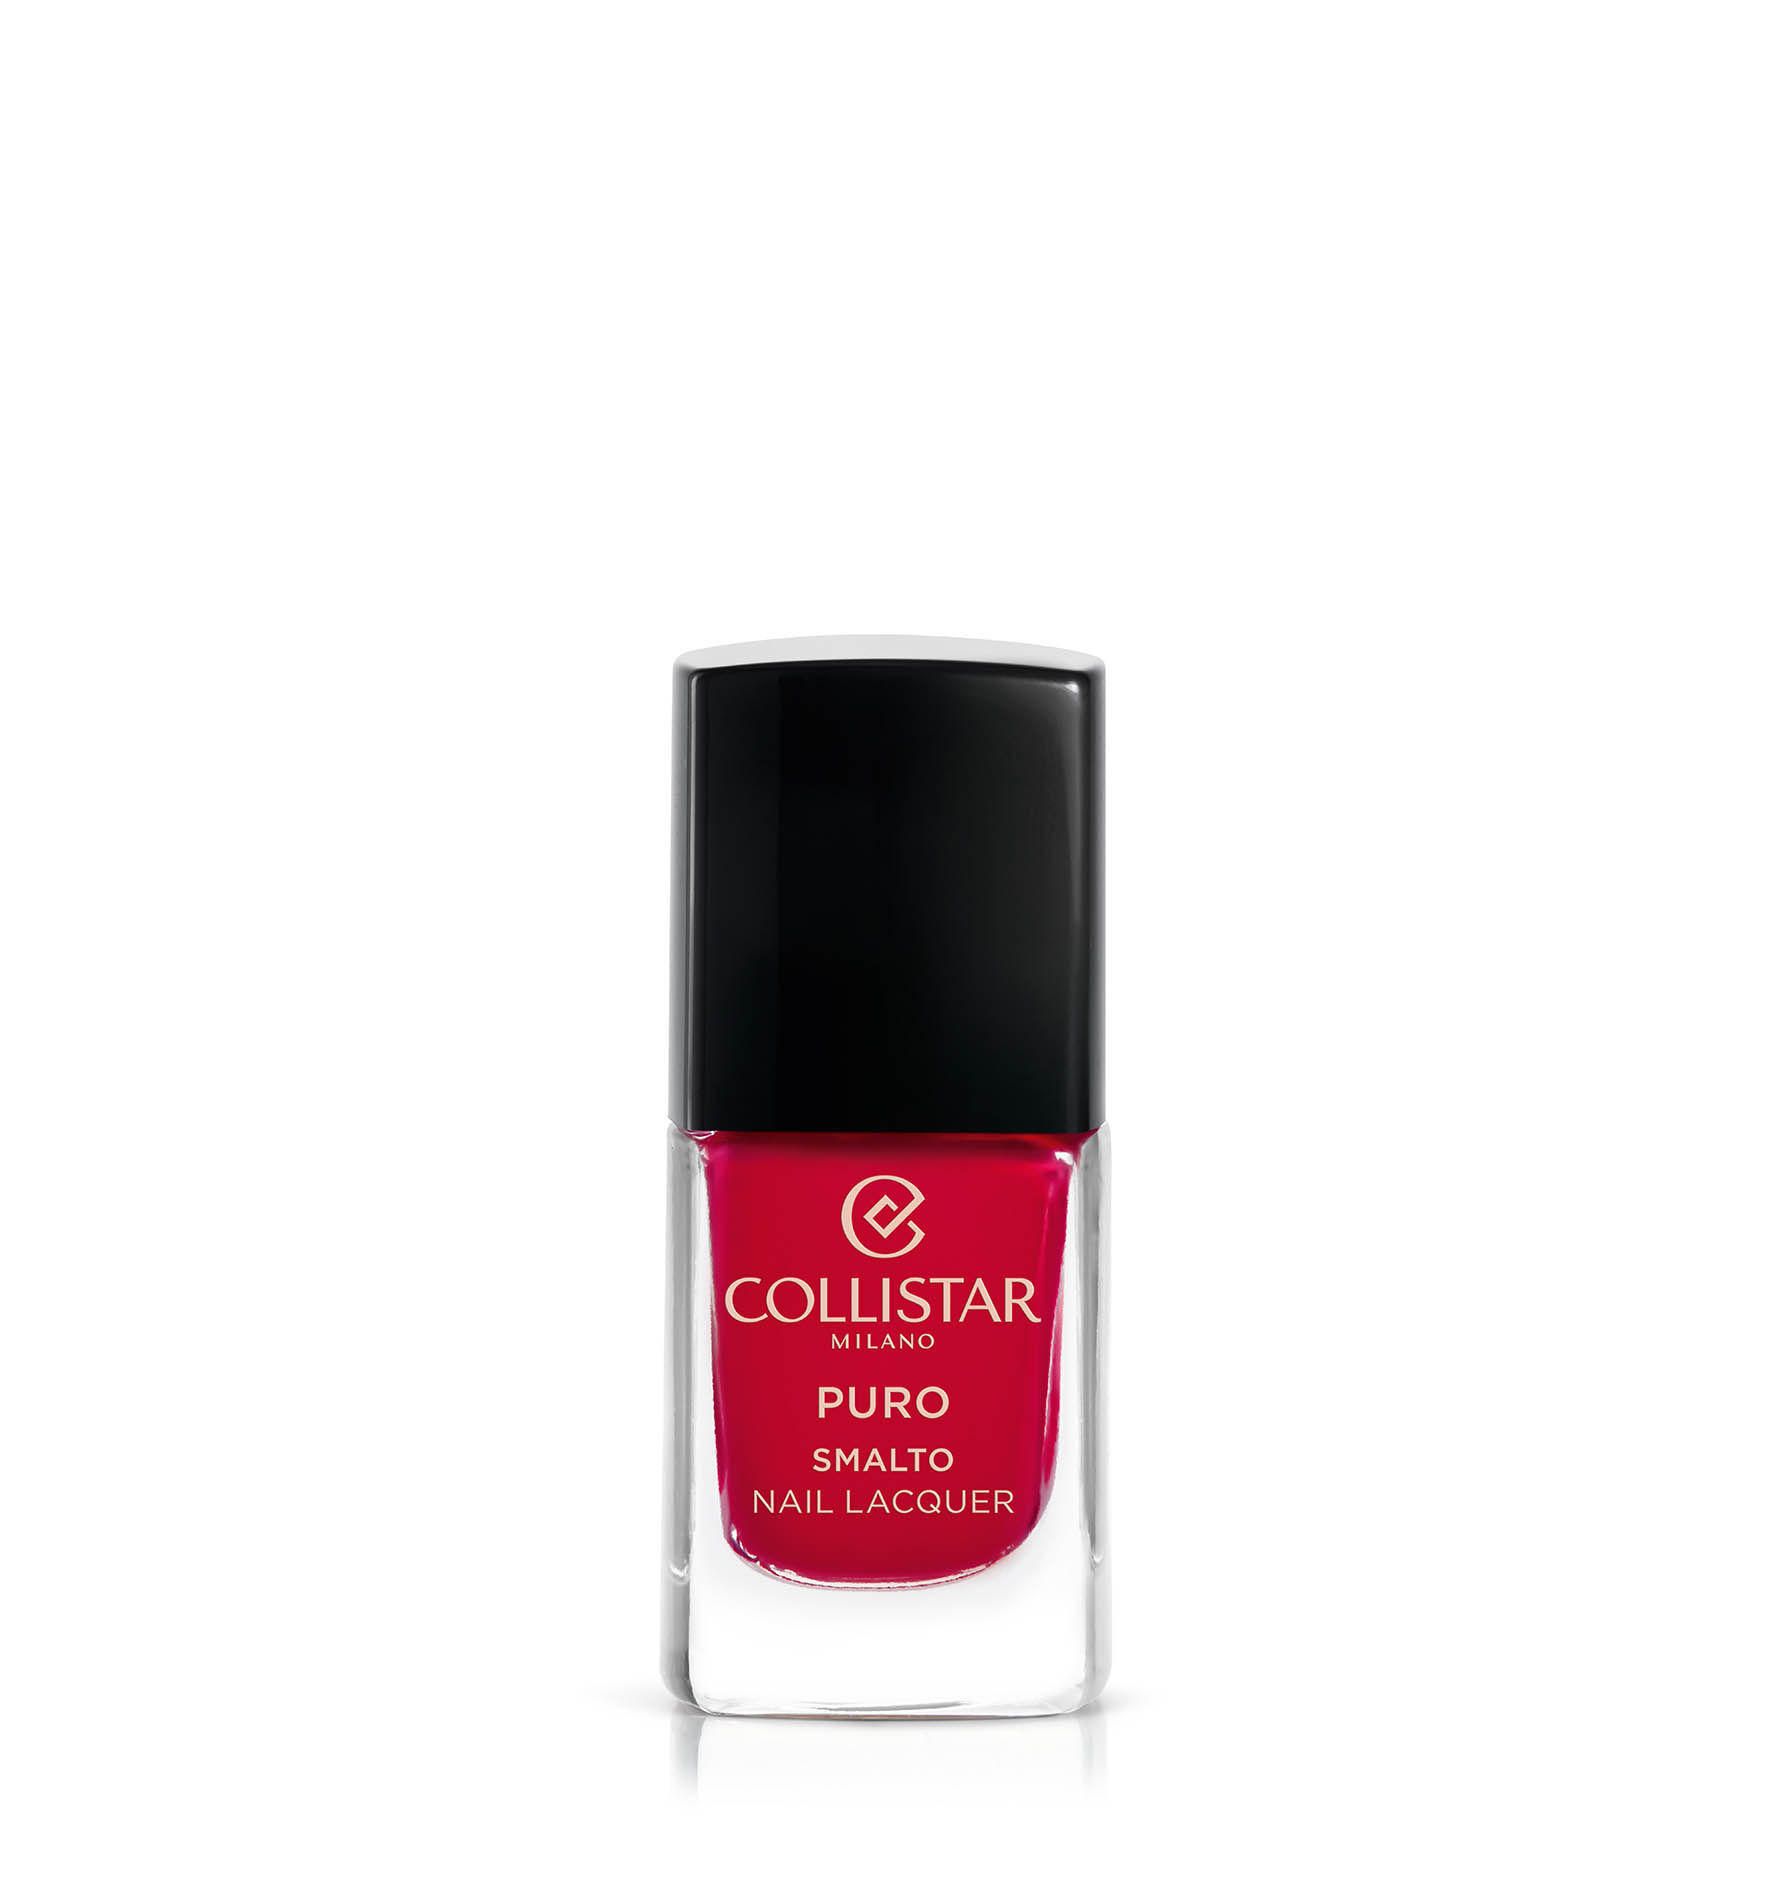 PURO LONG-LASTING NAIL LACQUER - Nail Polishes  | Collistar - Shop Online Ufficiale